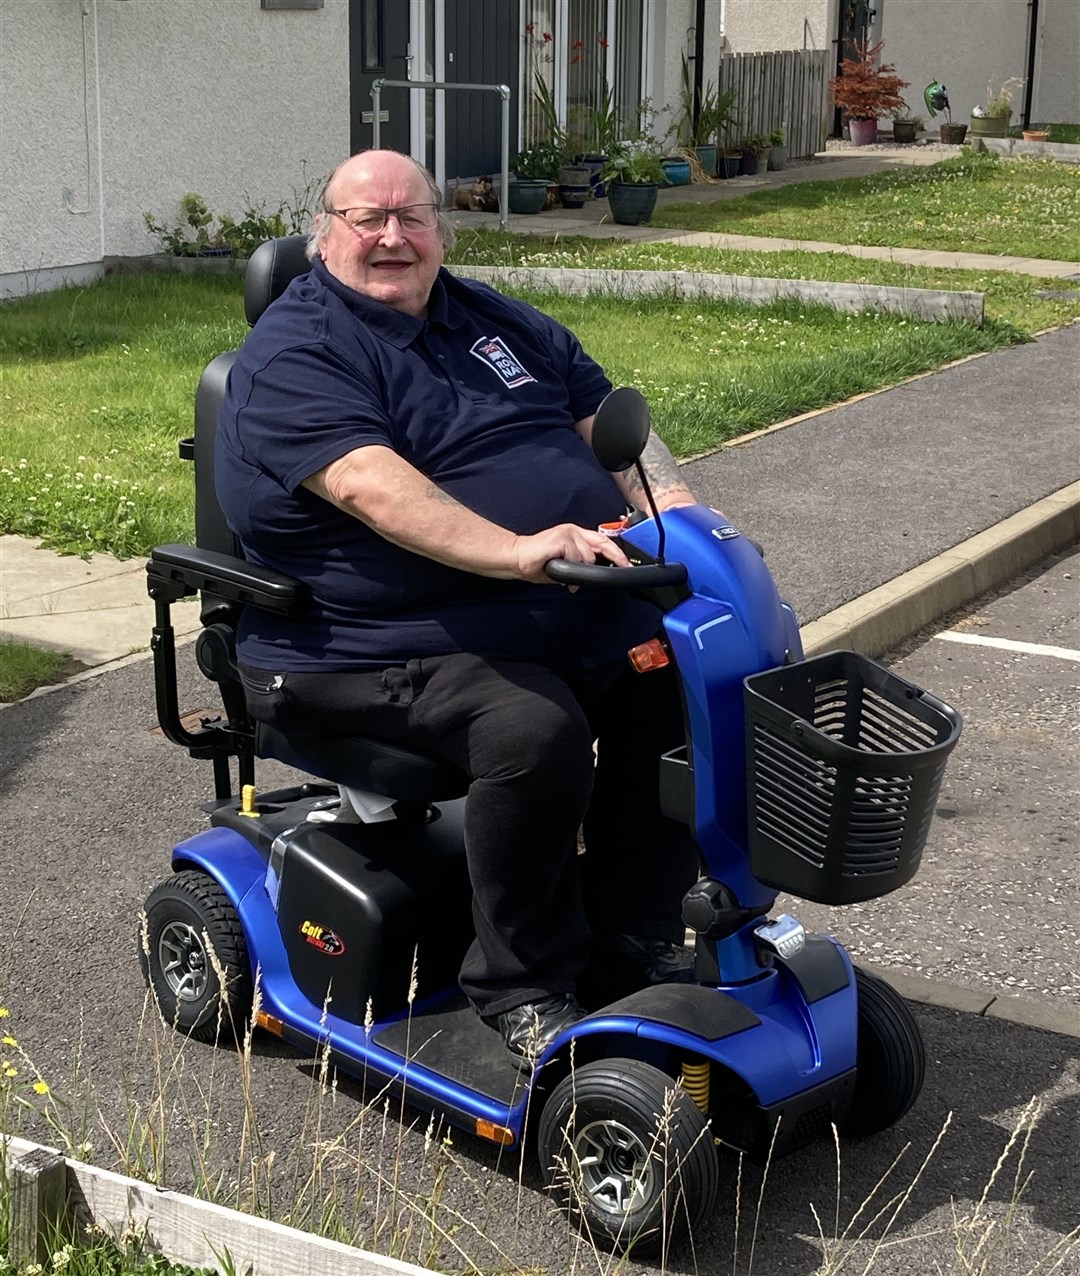 Mr Thomas says the mobility scooter has made his life considerably better.